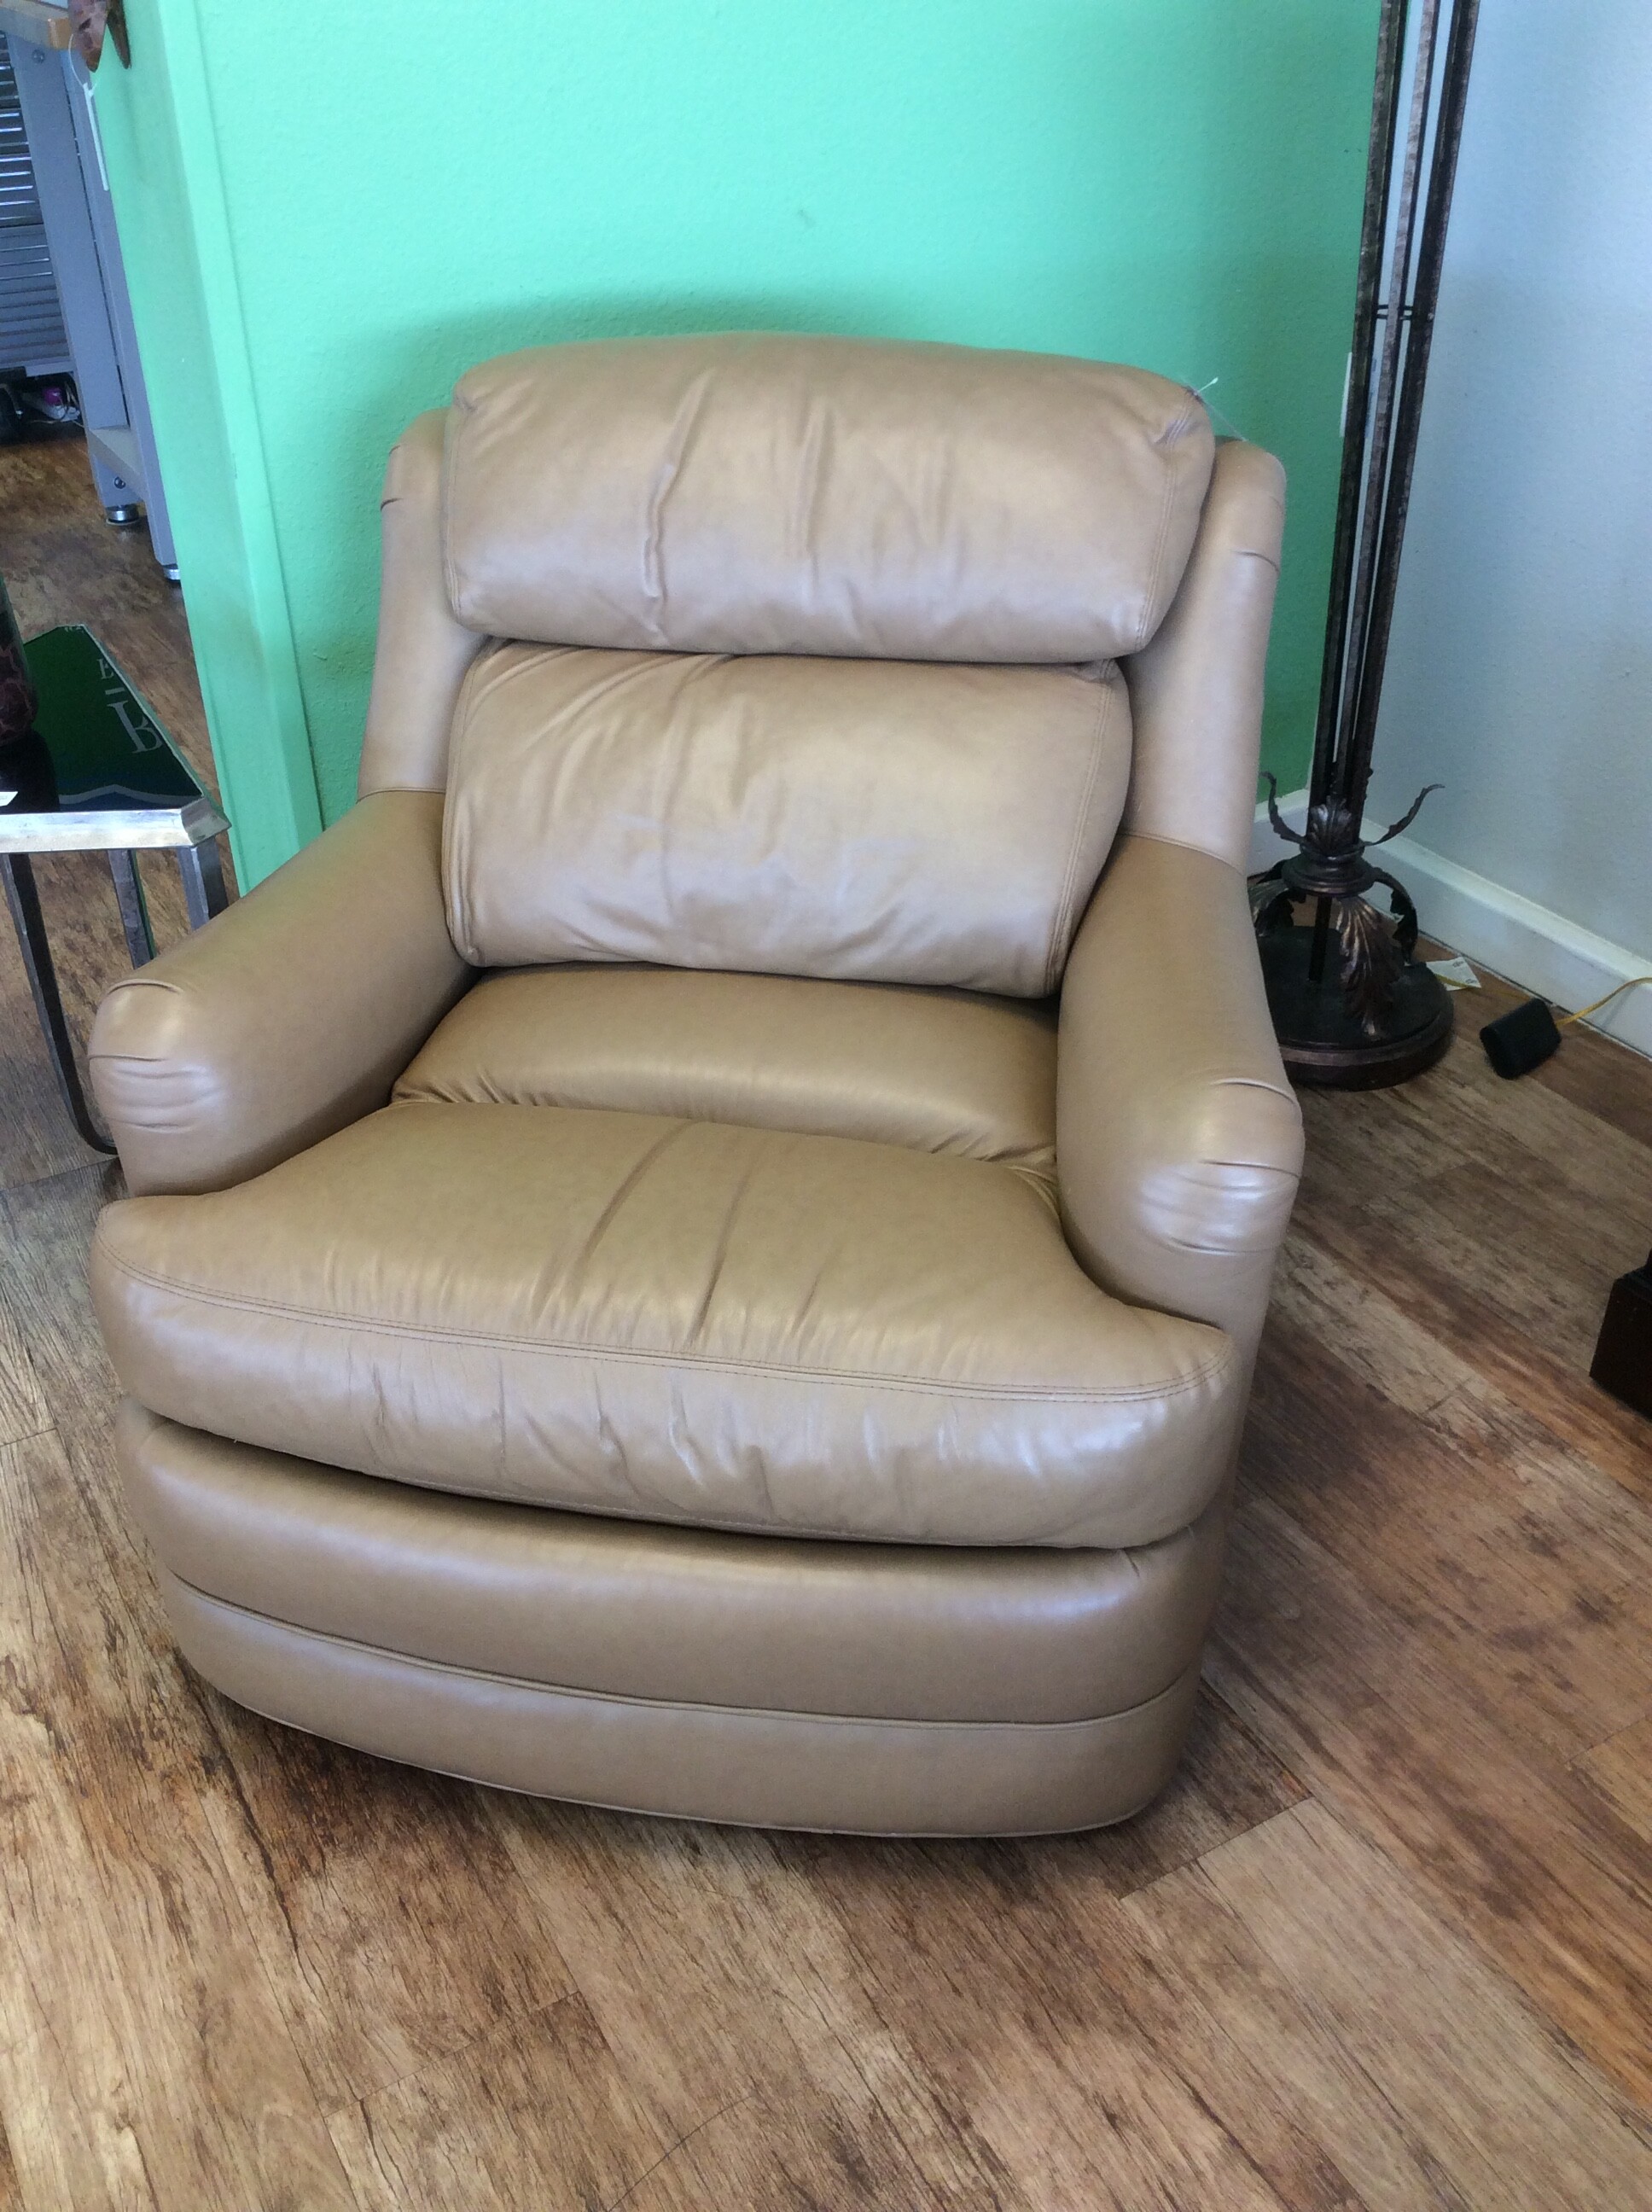 This comfy  chair is upolstered in a soft tan leather.  Could be used in a variety of settings.